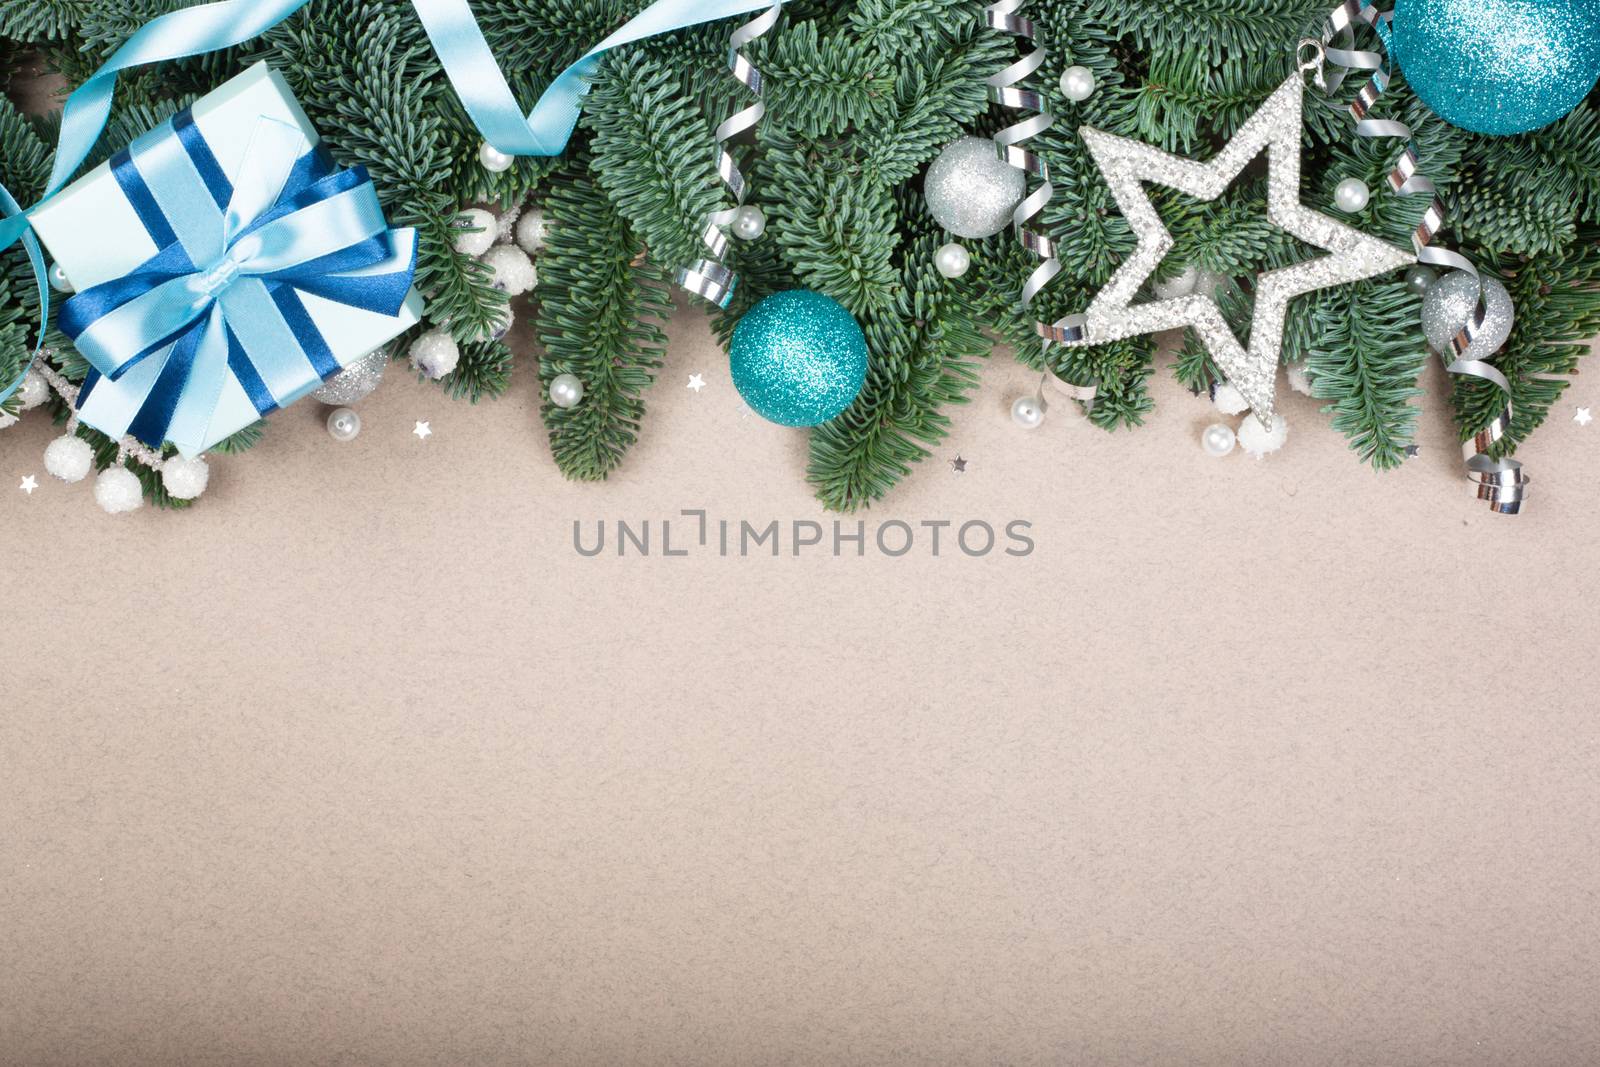 Christmas noble fir tree twigs gift and decorations on brown paper background with copy space for text